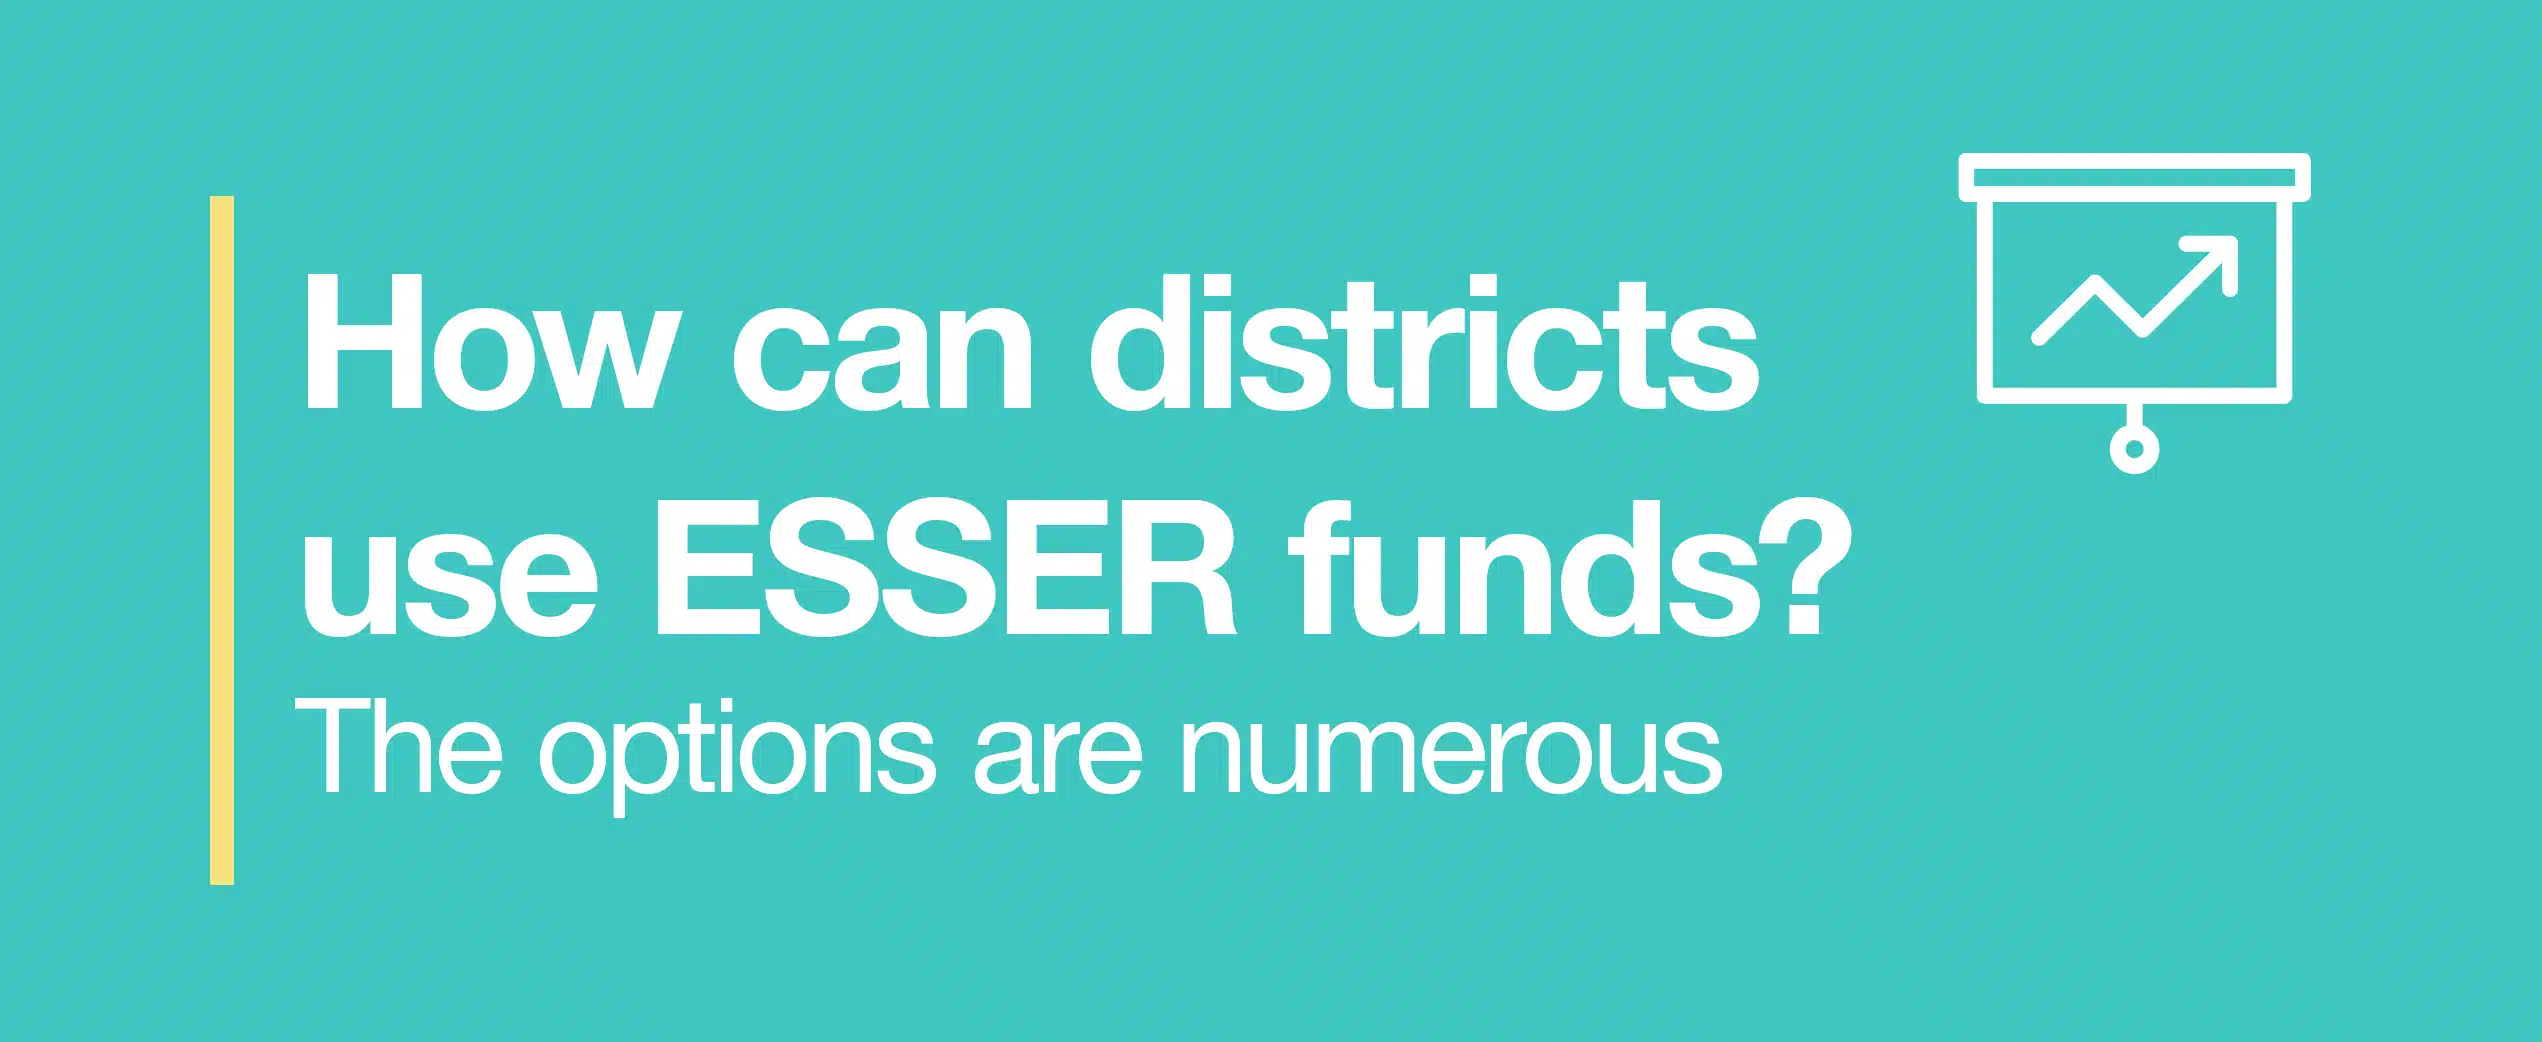 Hows can districts use ESSER funds? The options are numerous.